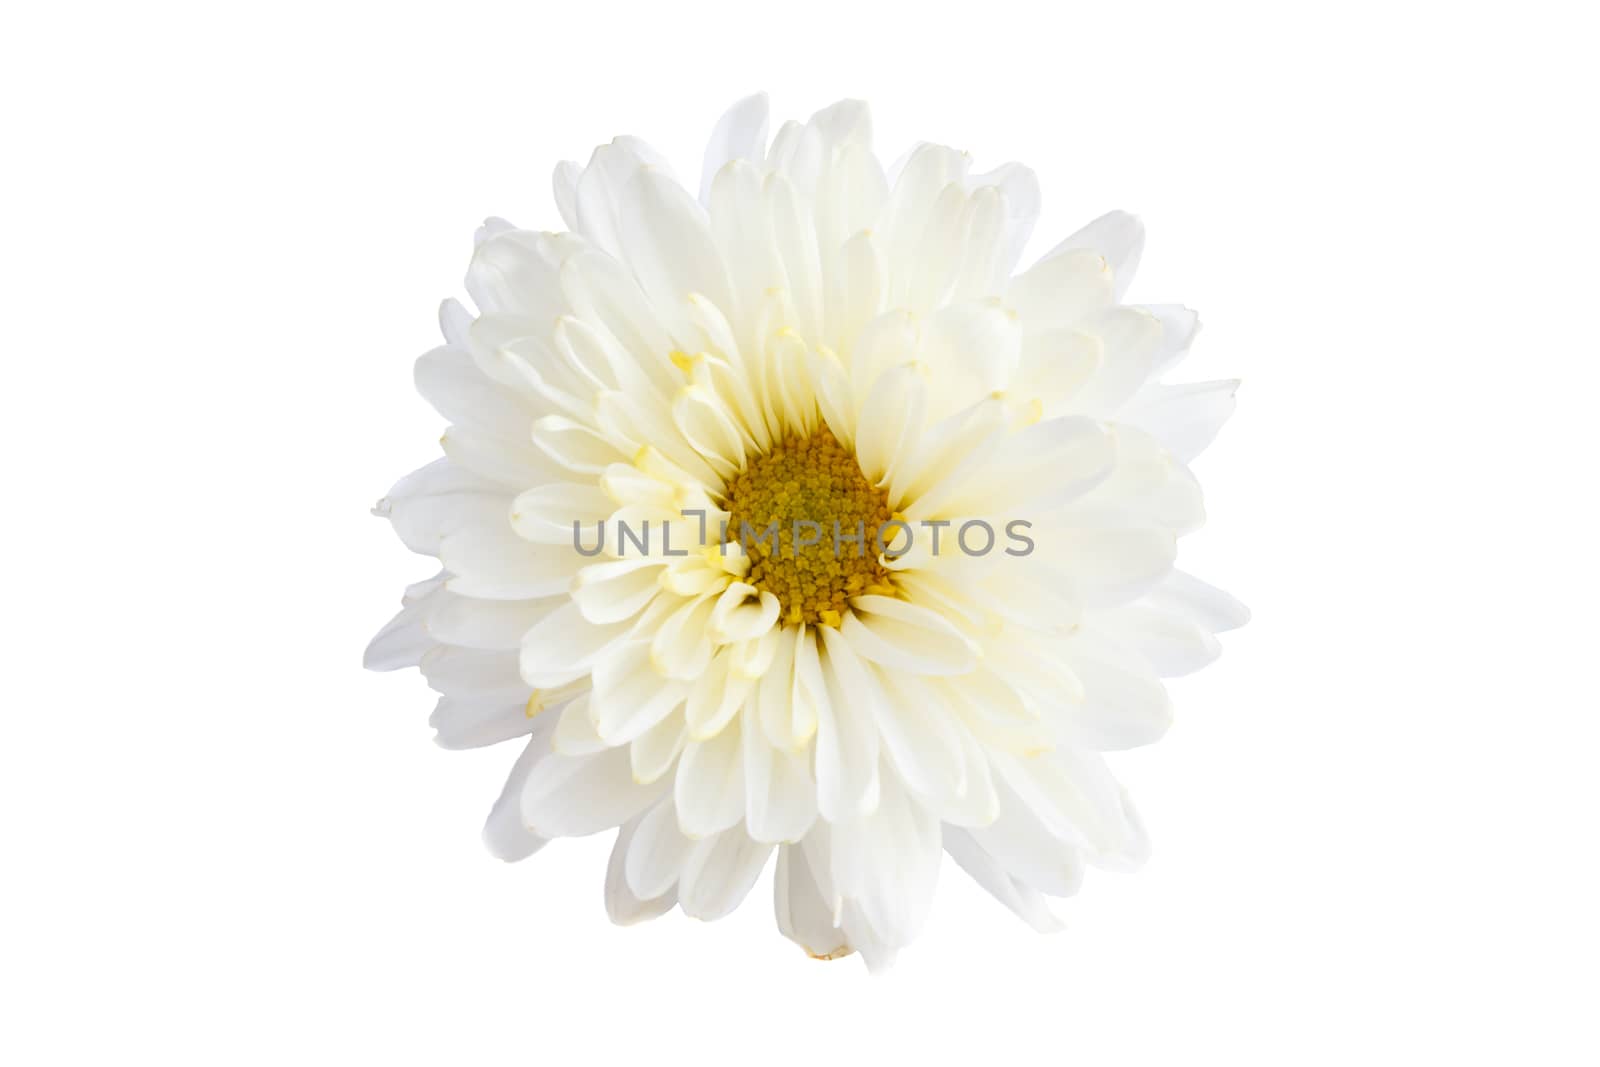 White color Chrysanthemum on white background (isolated)